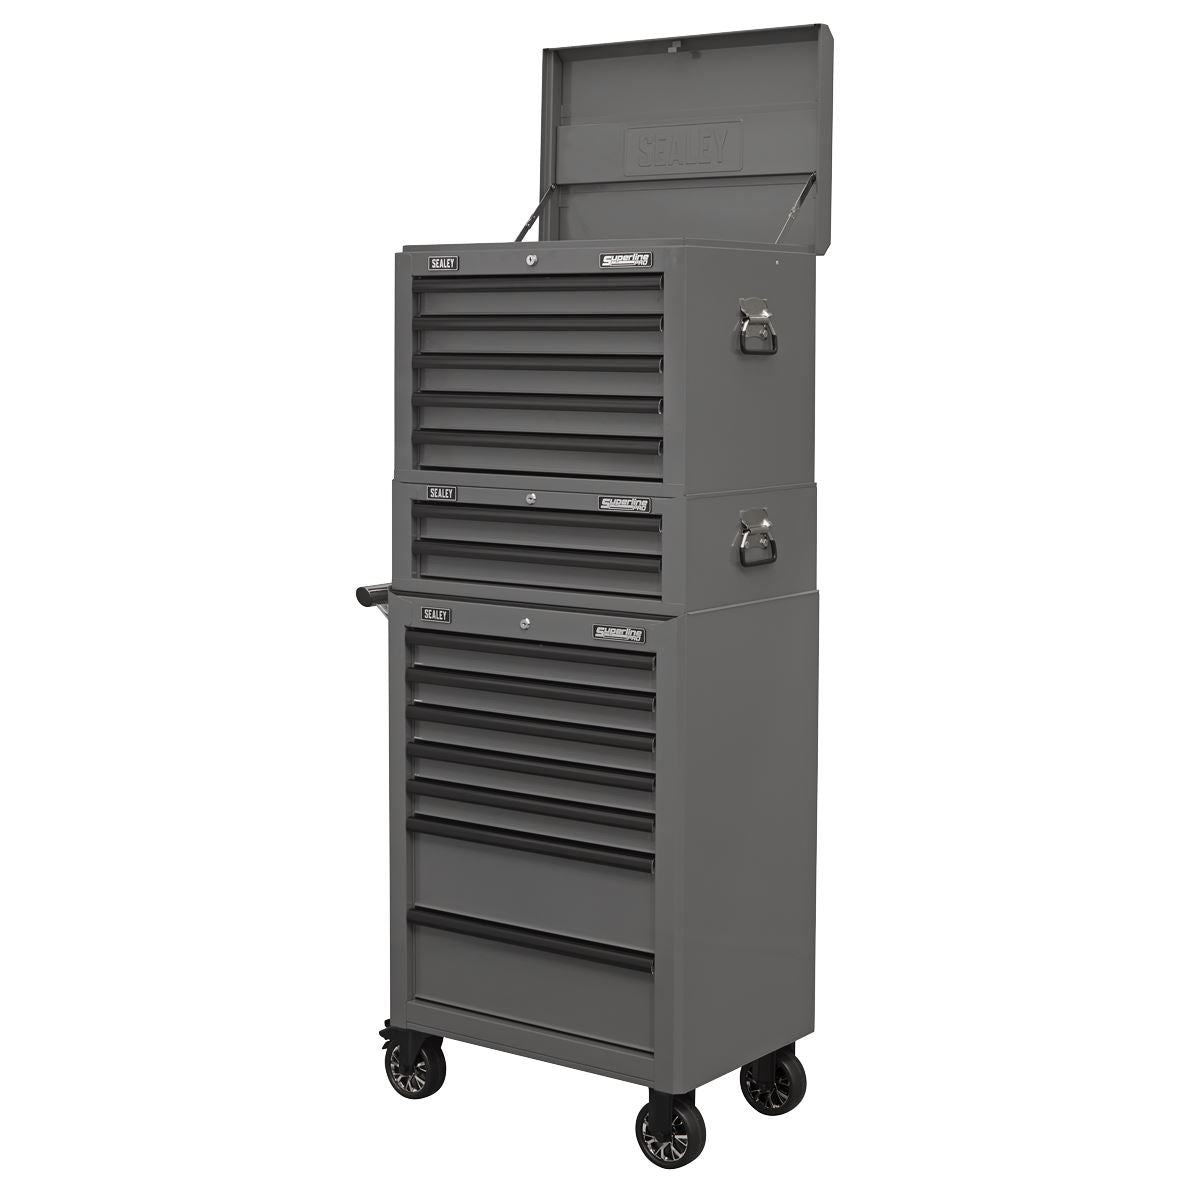 Sealey Superline Pro Topchest, Mid-Box & Rollcab Combination 14 Drawer with Ball-Bearing Slides - Grey